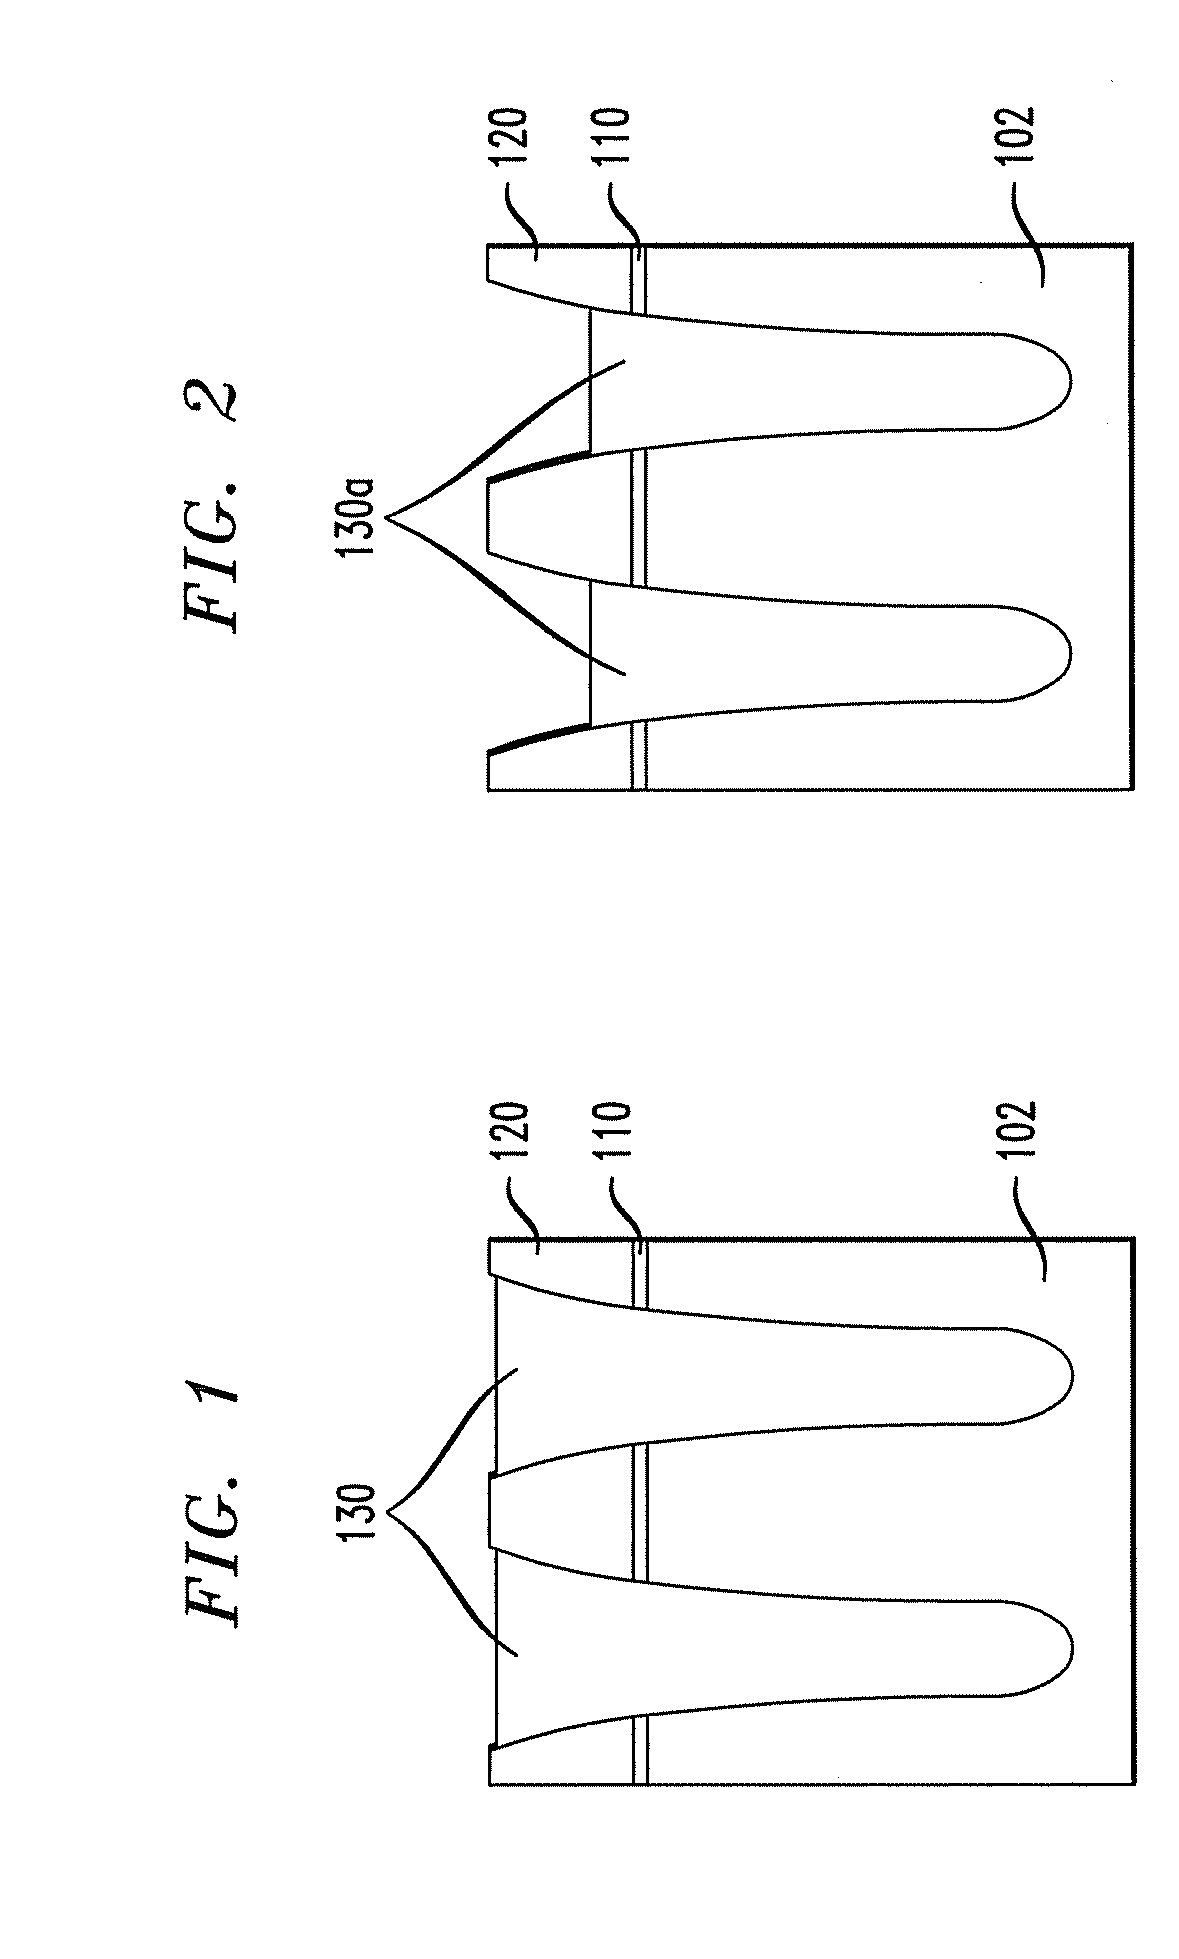 Formation of shallow trench isolation using chemical vapor etch